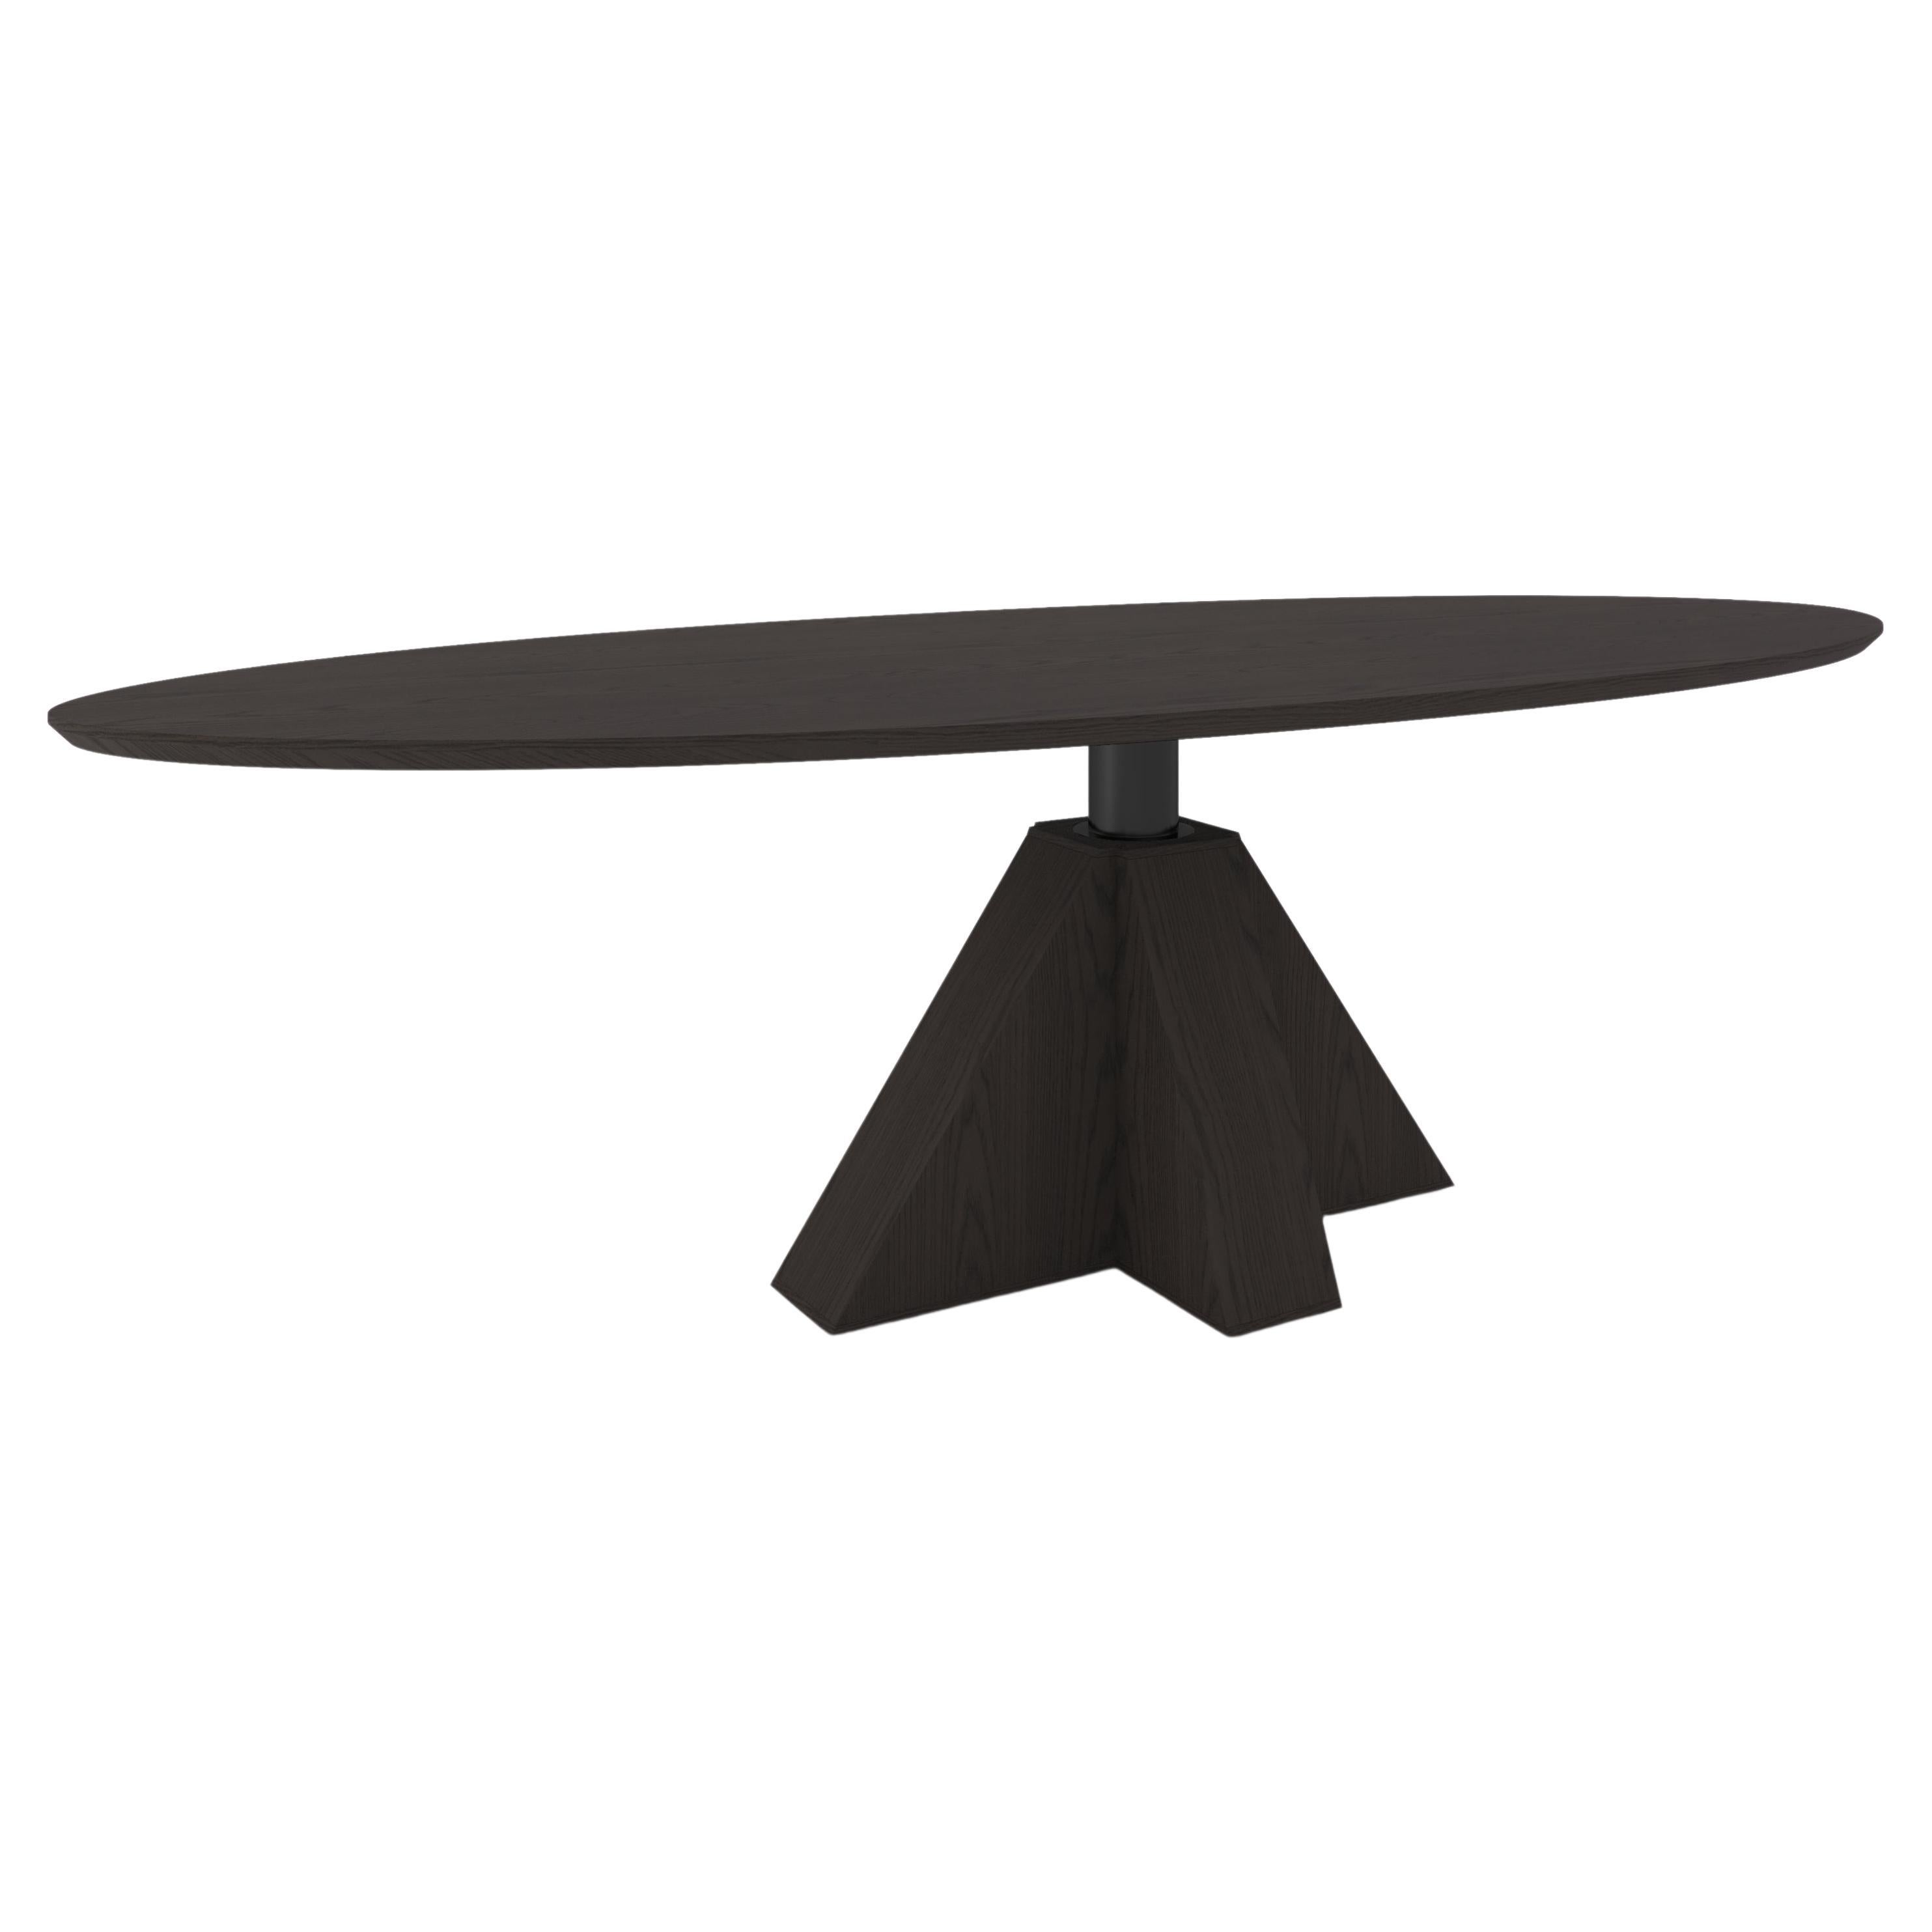 M-Oval Table by Daniel Boddam, 70" x 41", Smoked or Stained Oak For Sale